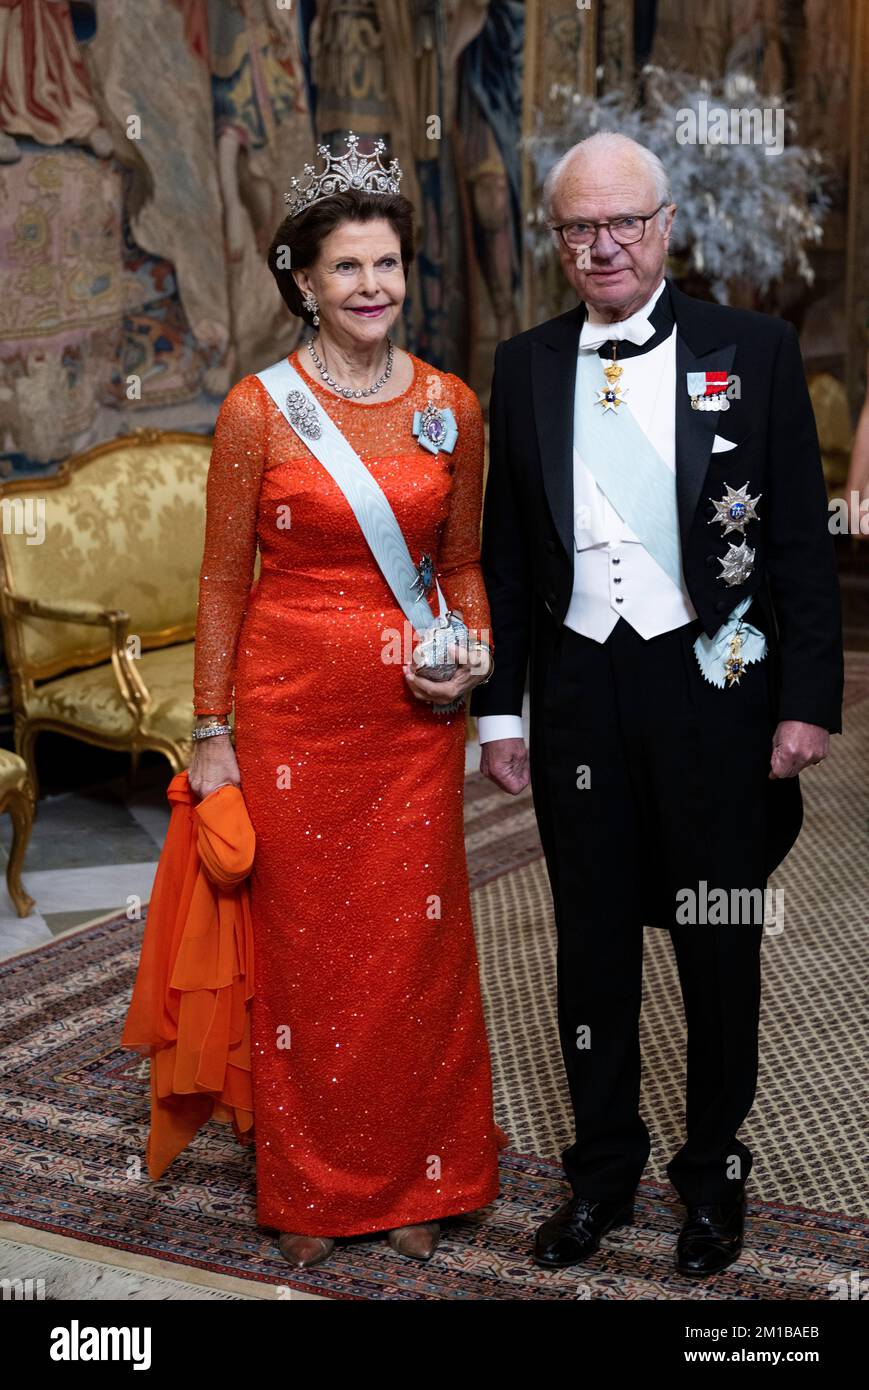 Queen Silvia and King Carl Gustaf attend the King's dinner for the Nobel laureates at the Royal Palace in Stockholm, Sweden, 11 December 2022.  Photo: Pontus Lundahl / TT / 10050 Stock Photo